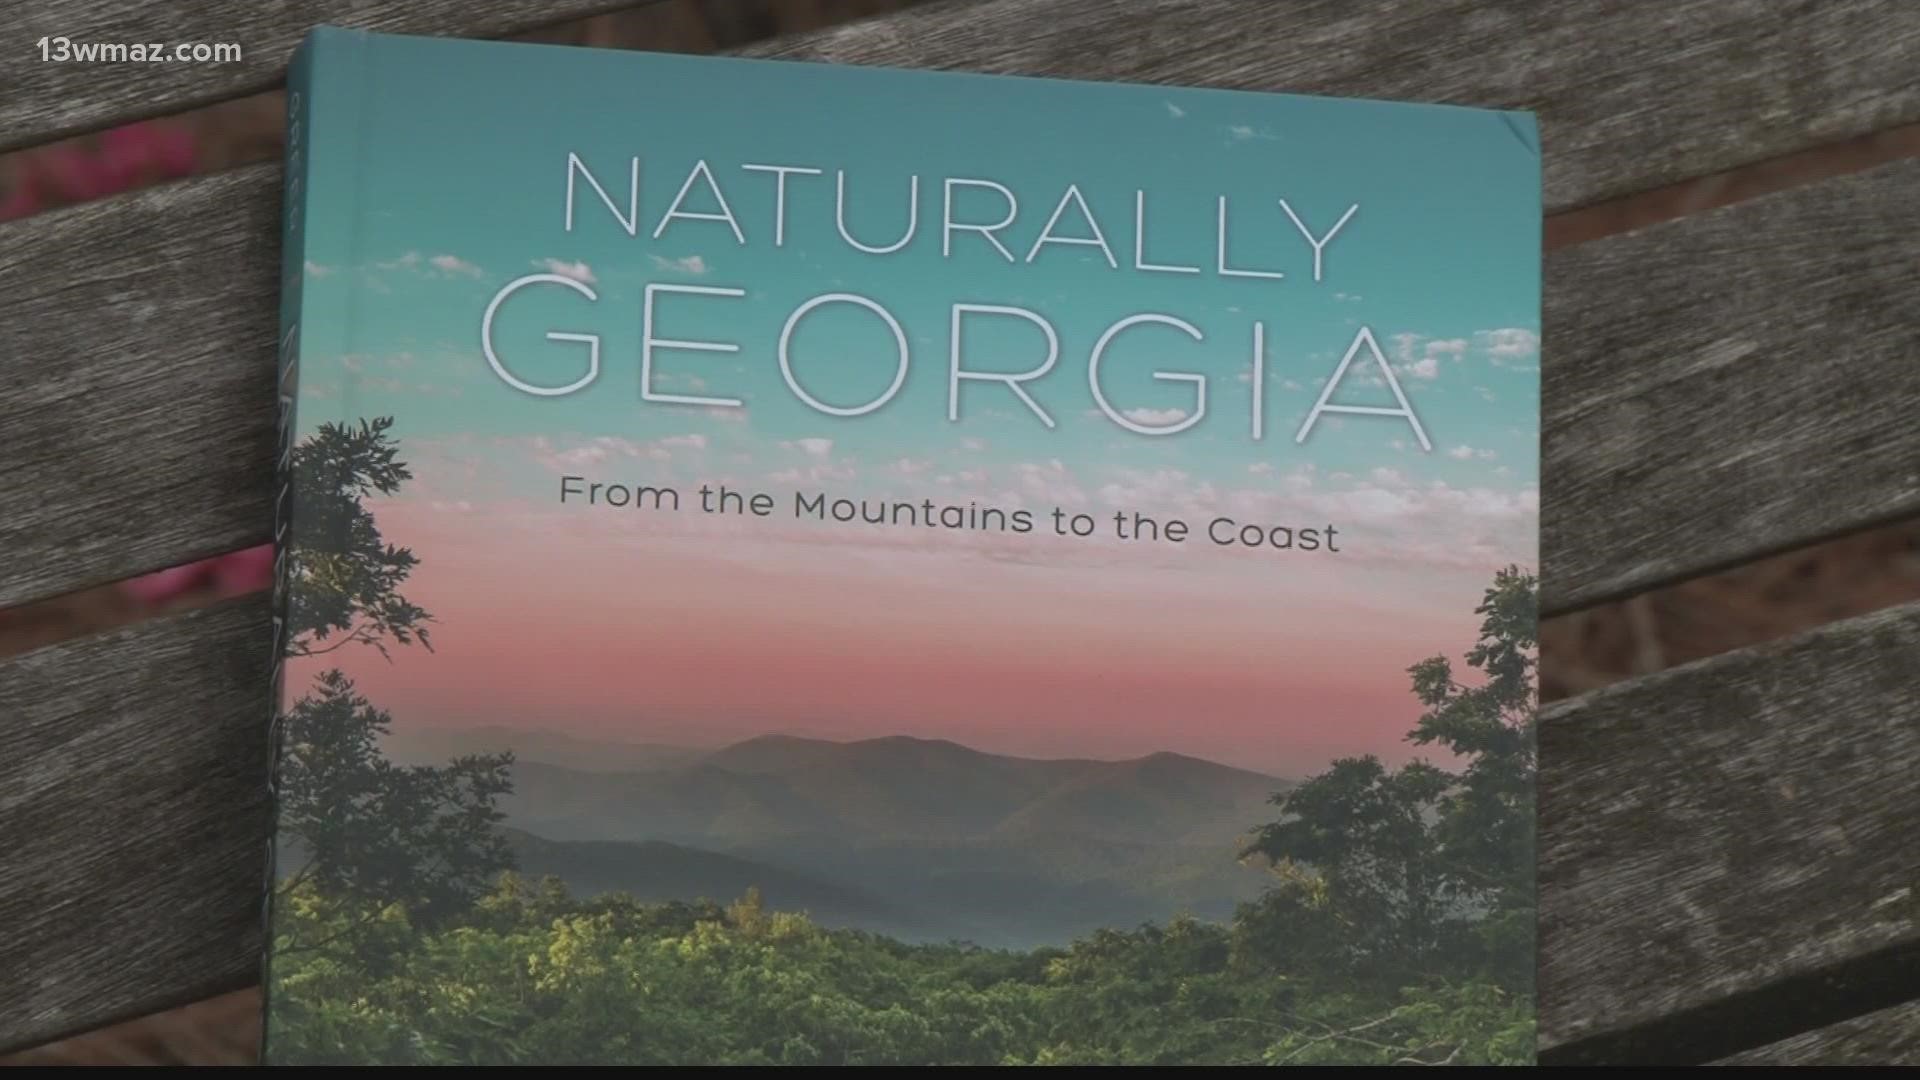 Chris Greer has a new book called 'Naturally Georgia' that explores Georgia landscapes.